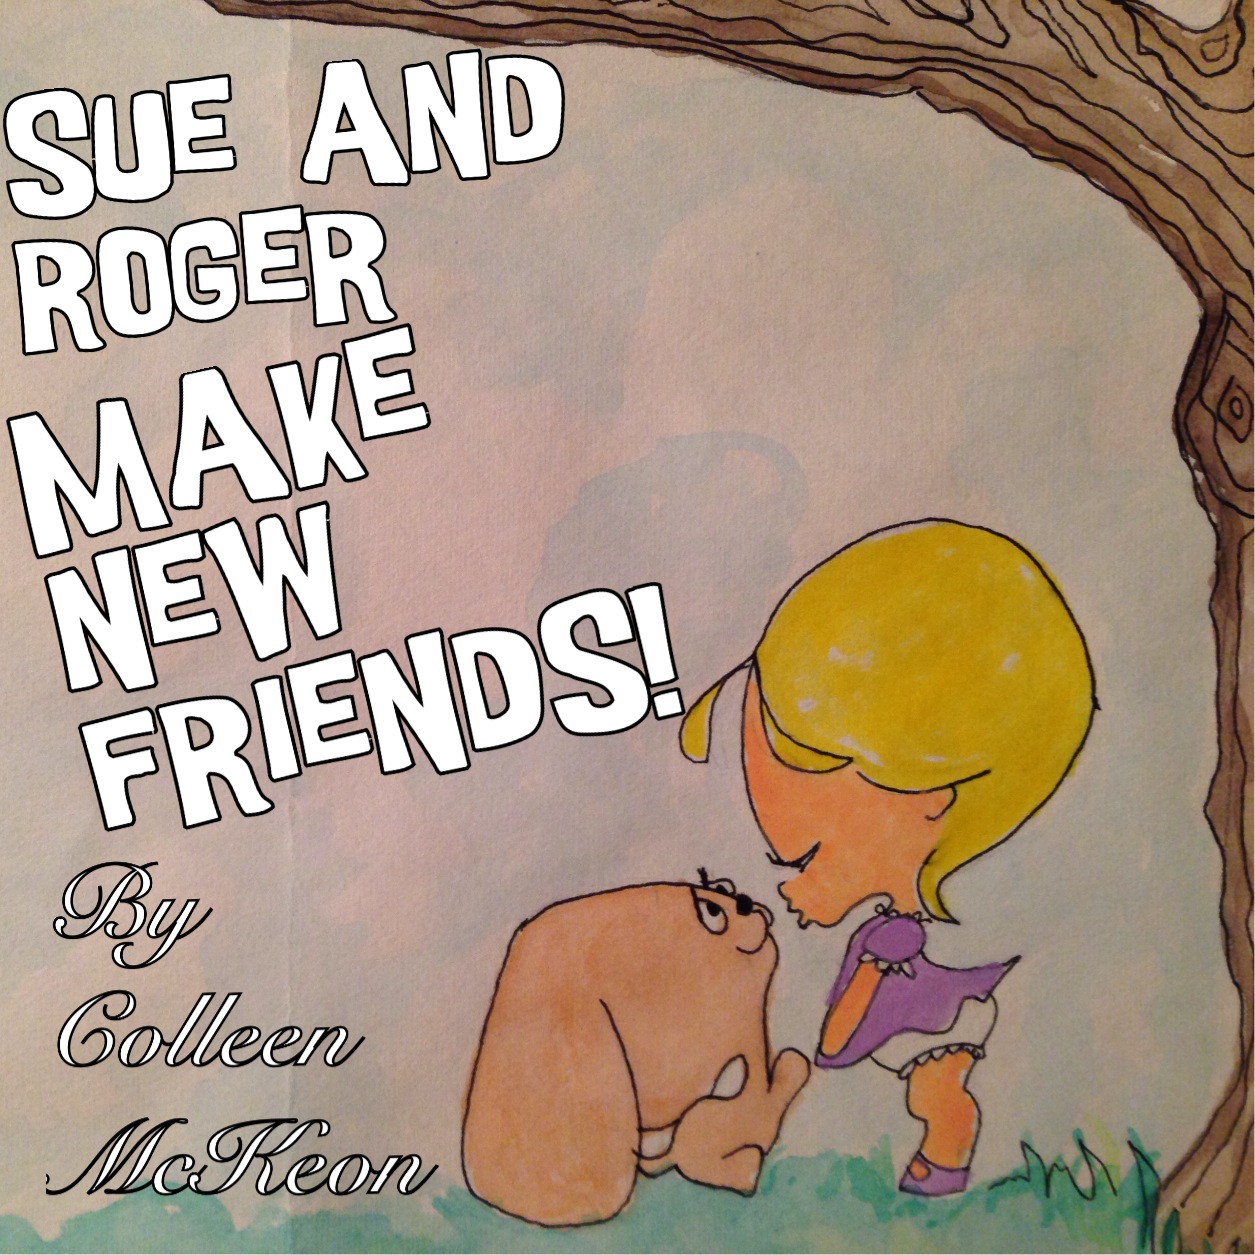 'SUE AND ROGER MAKE NEW FRIENDS!"